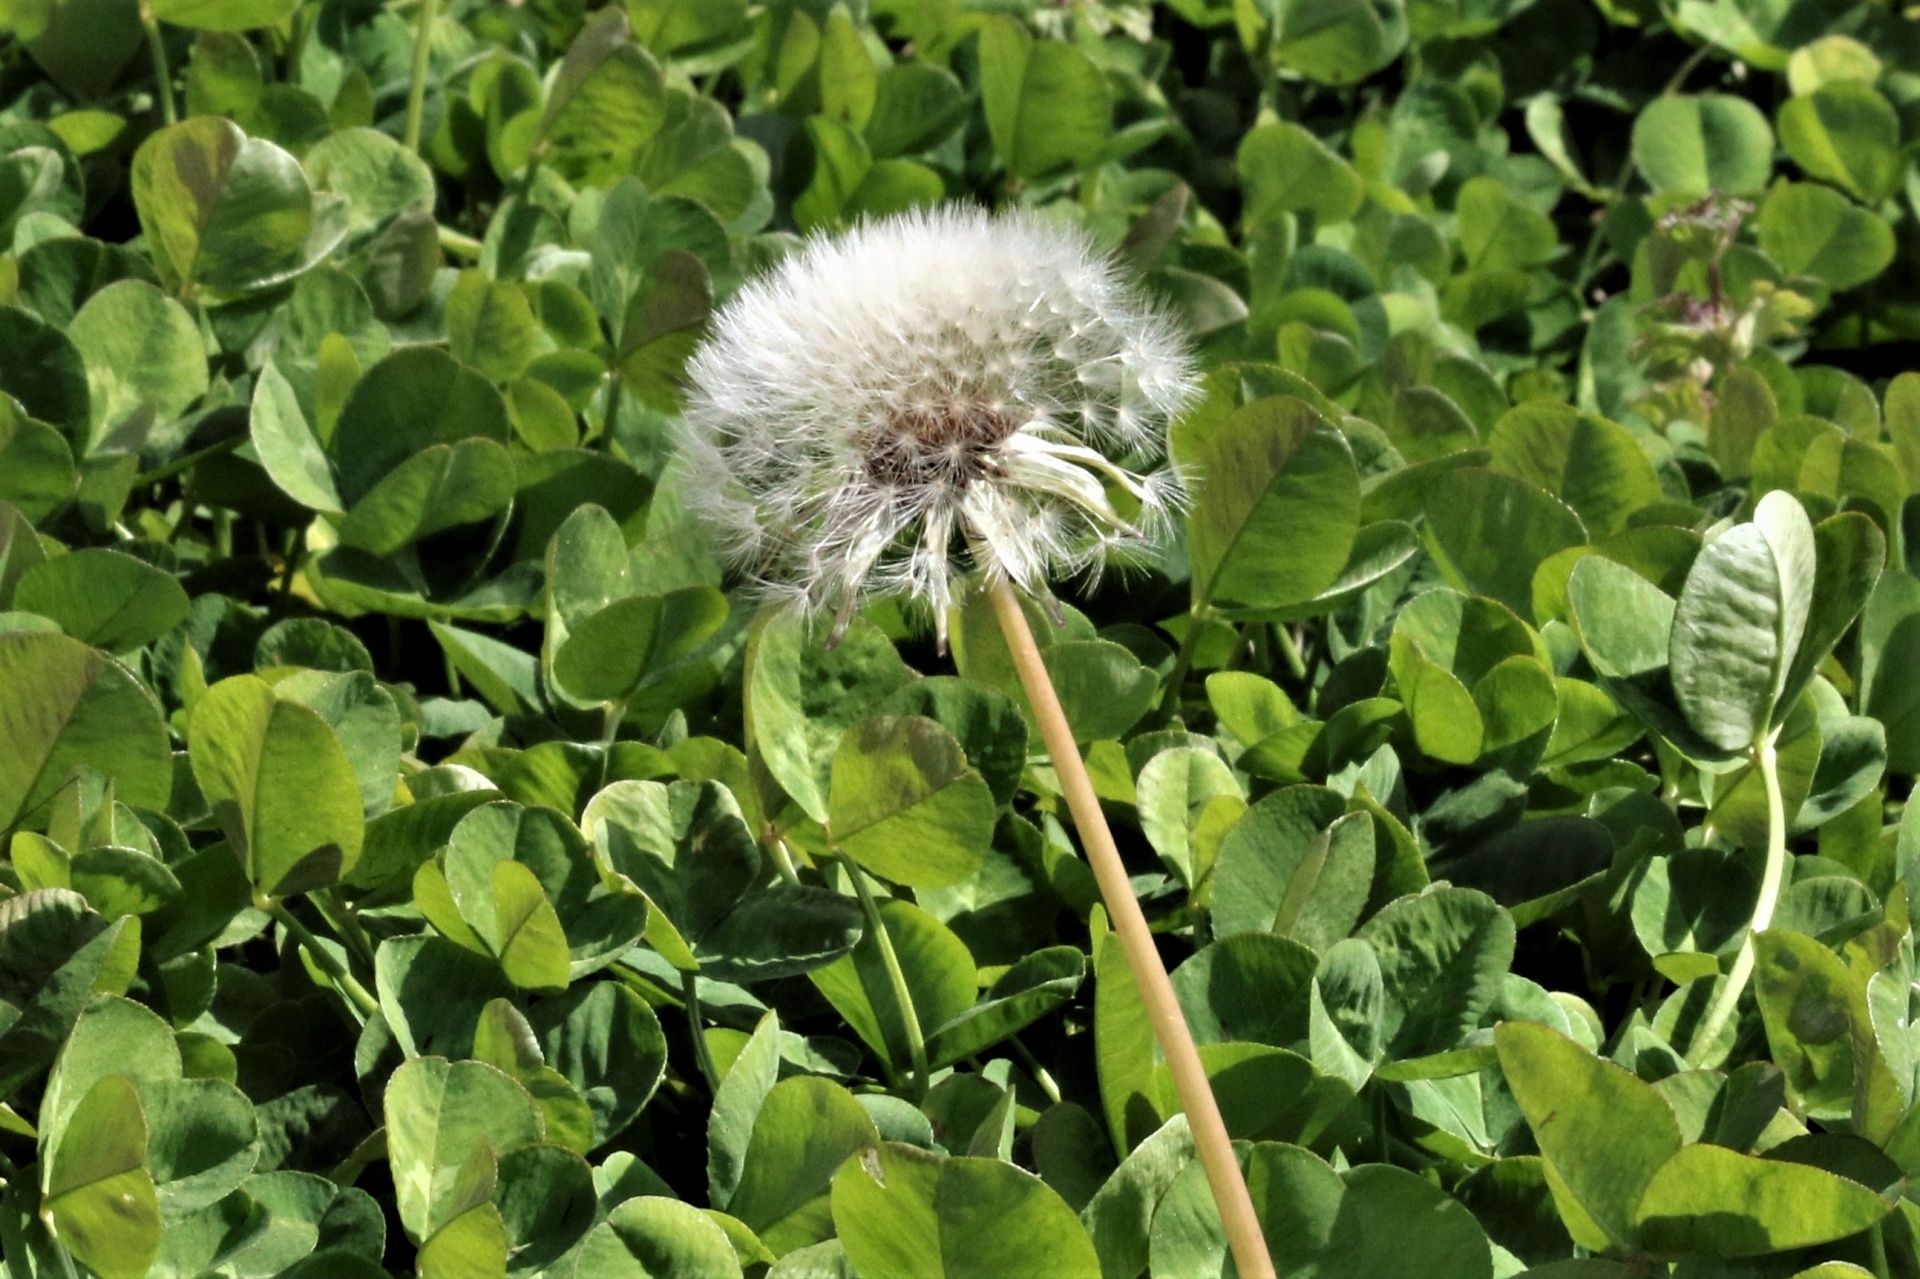 Close-up of the seed head of a dandelion wildflower, surrounded by green four-leaf clover.